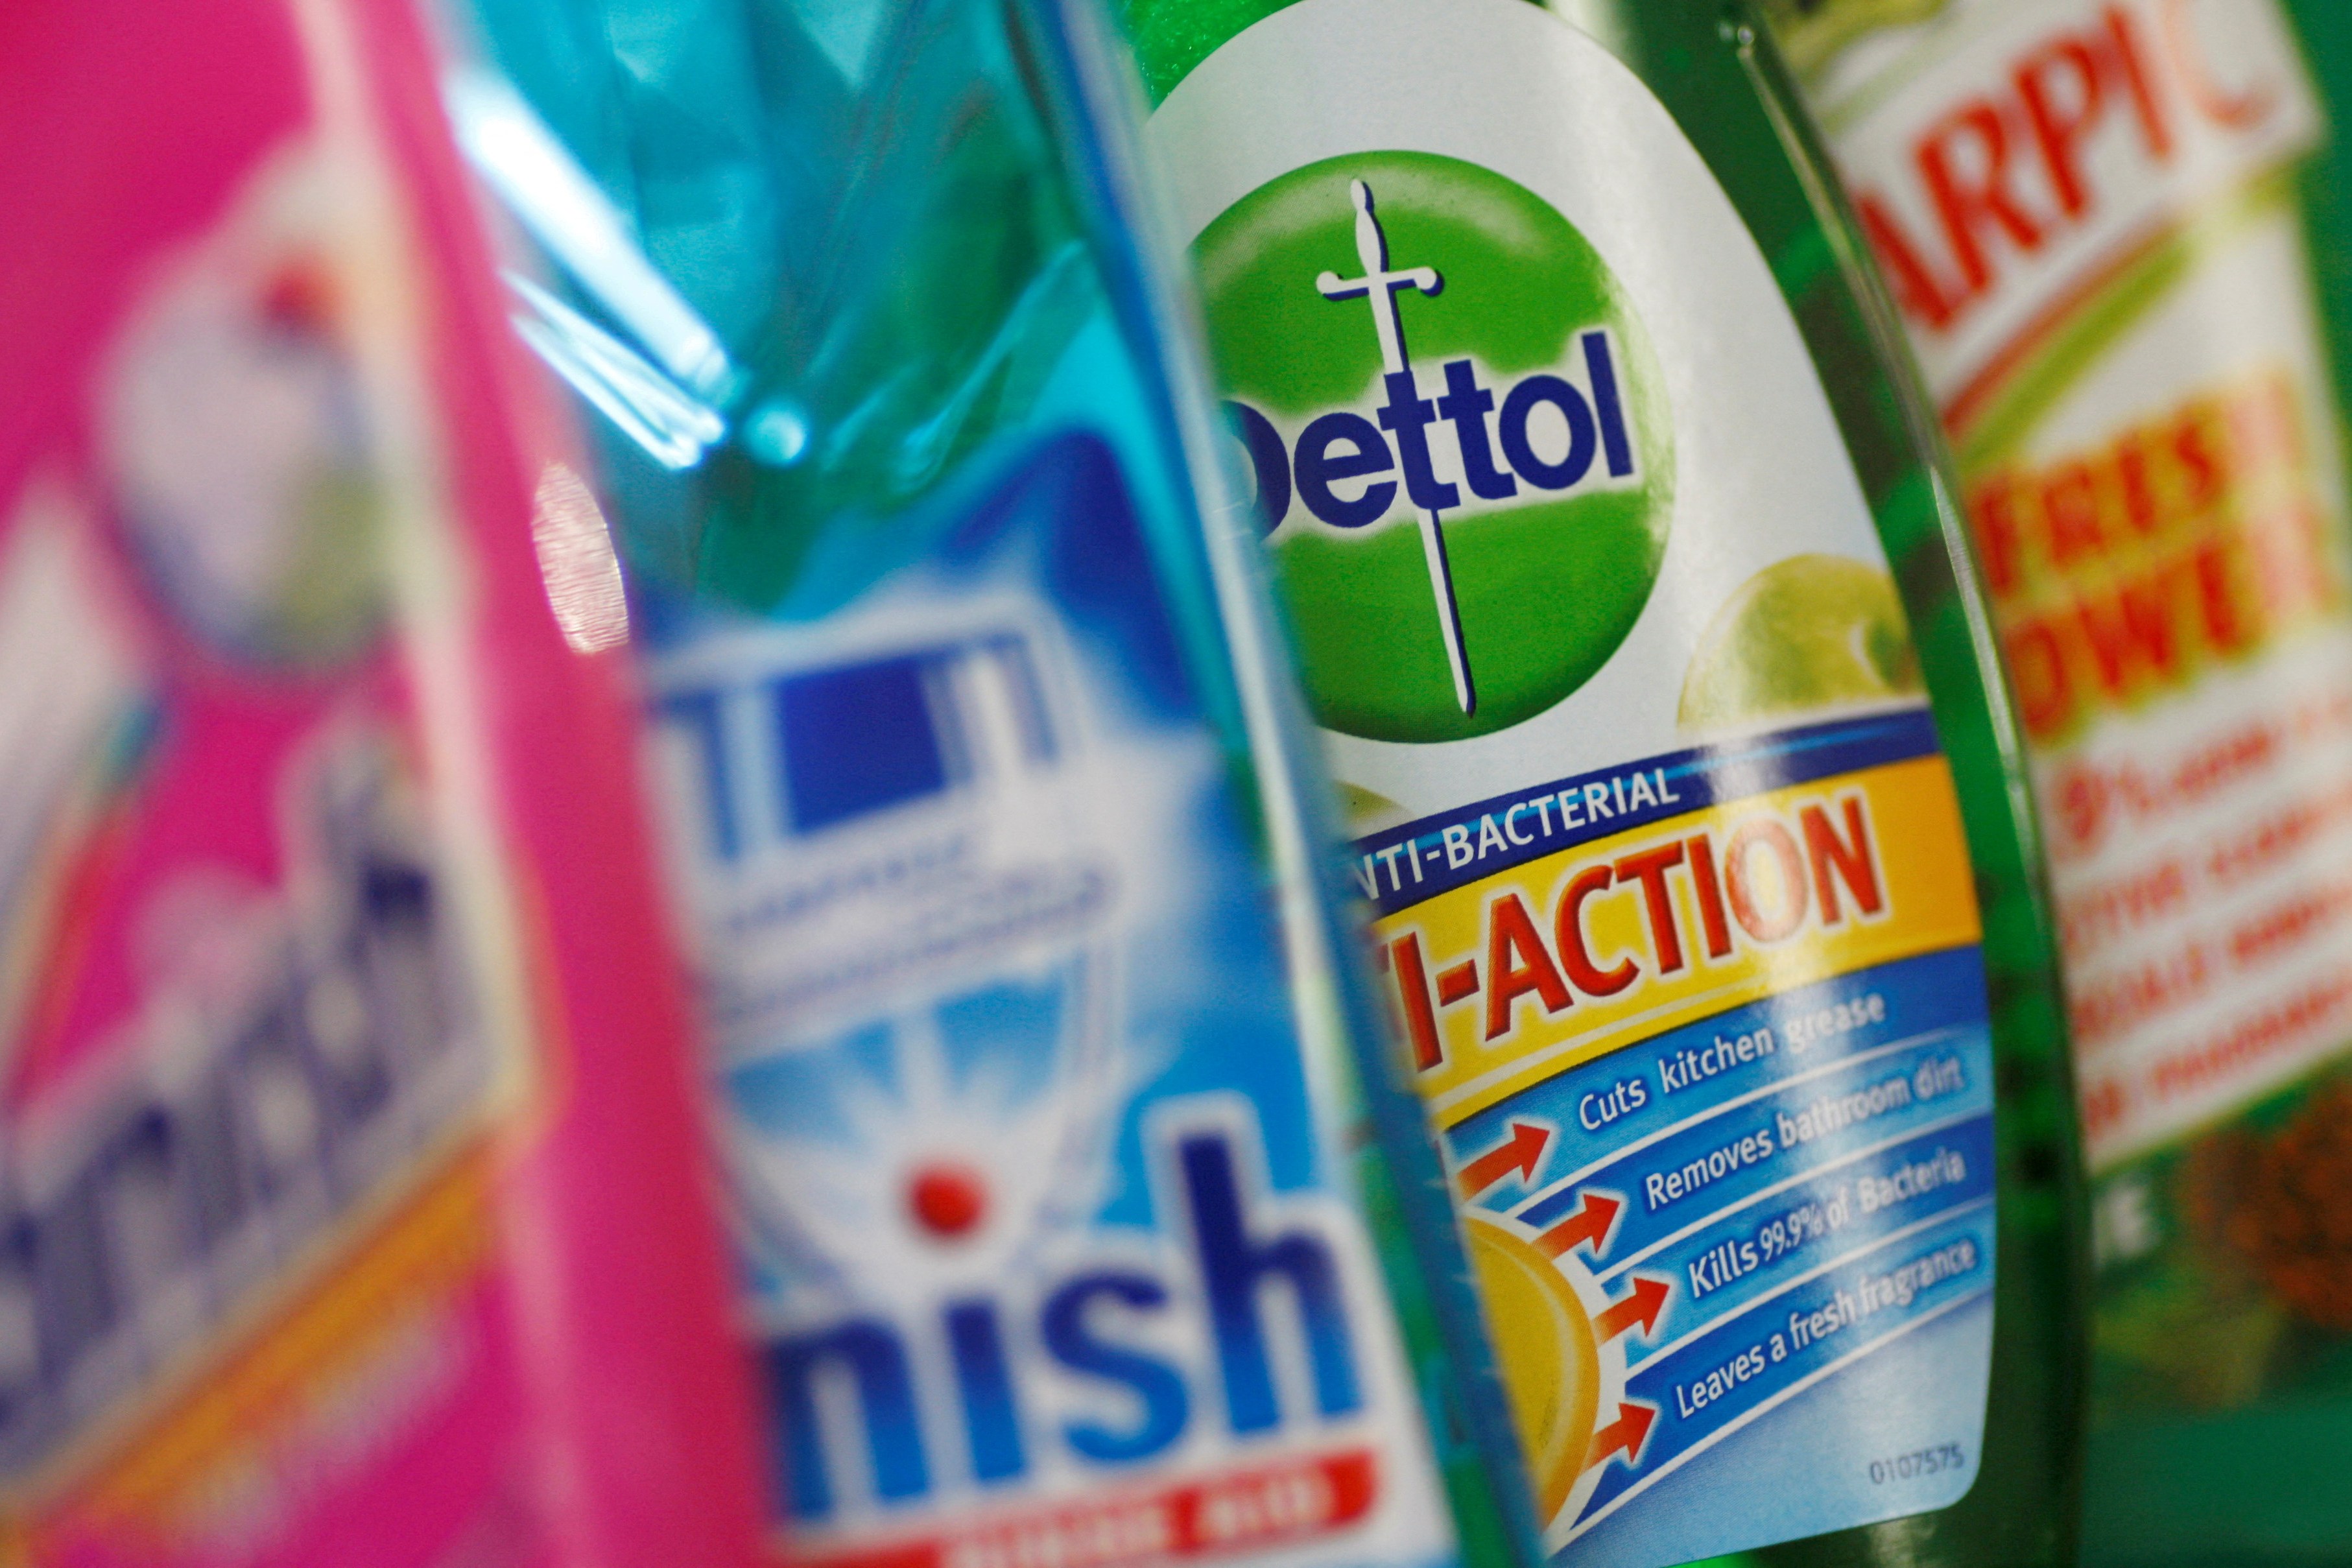 Reckitt shares rally on better-than-expected sales